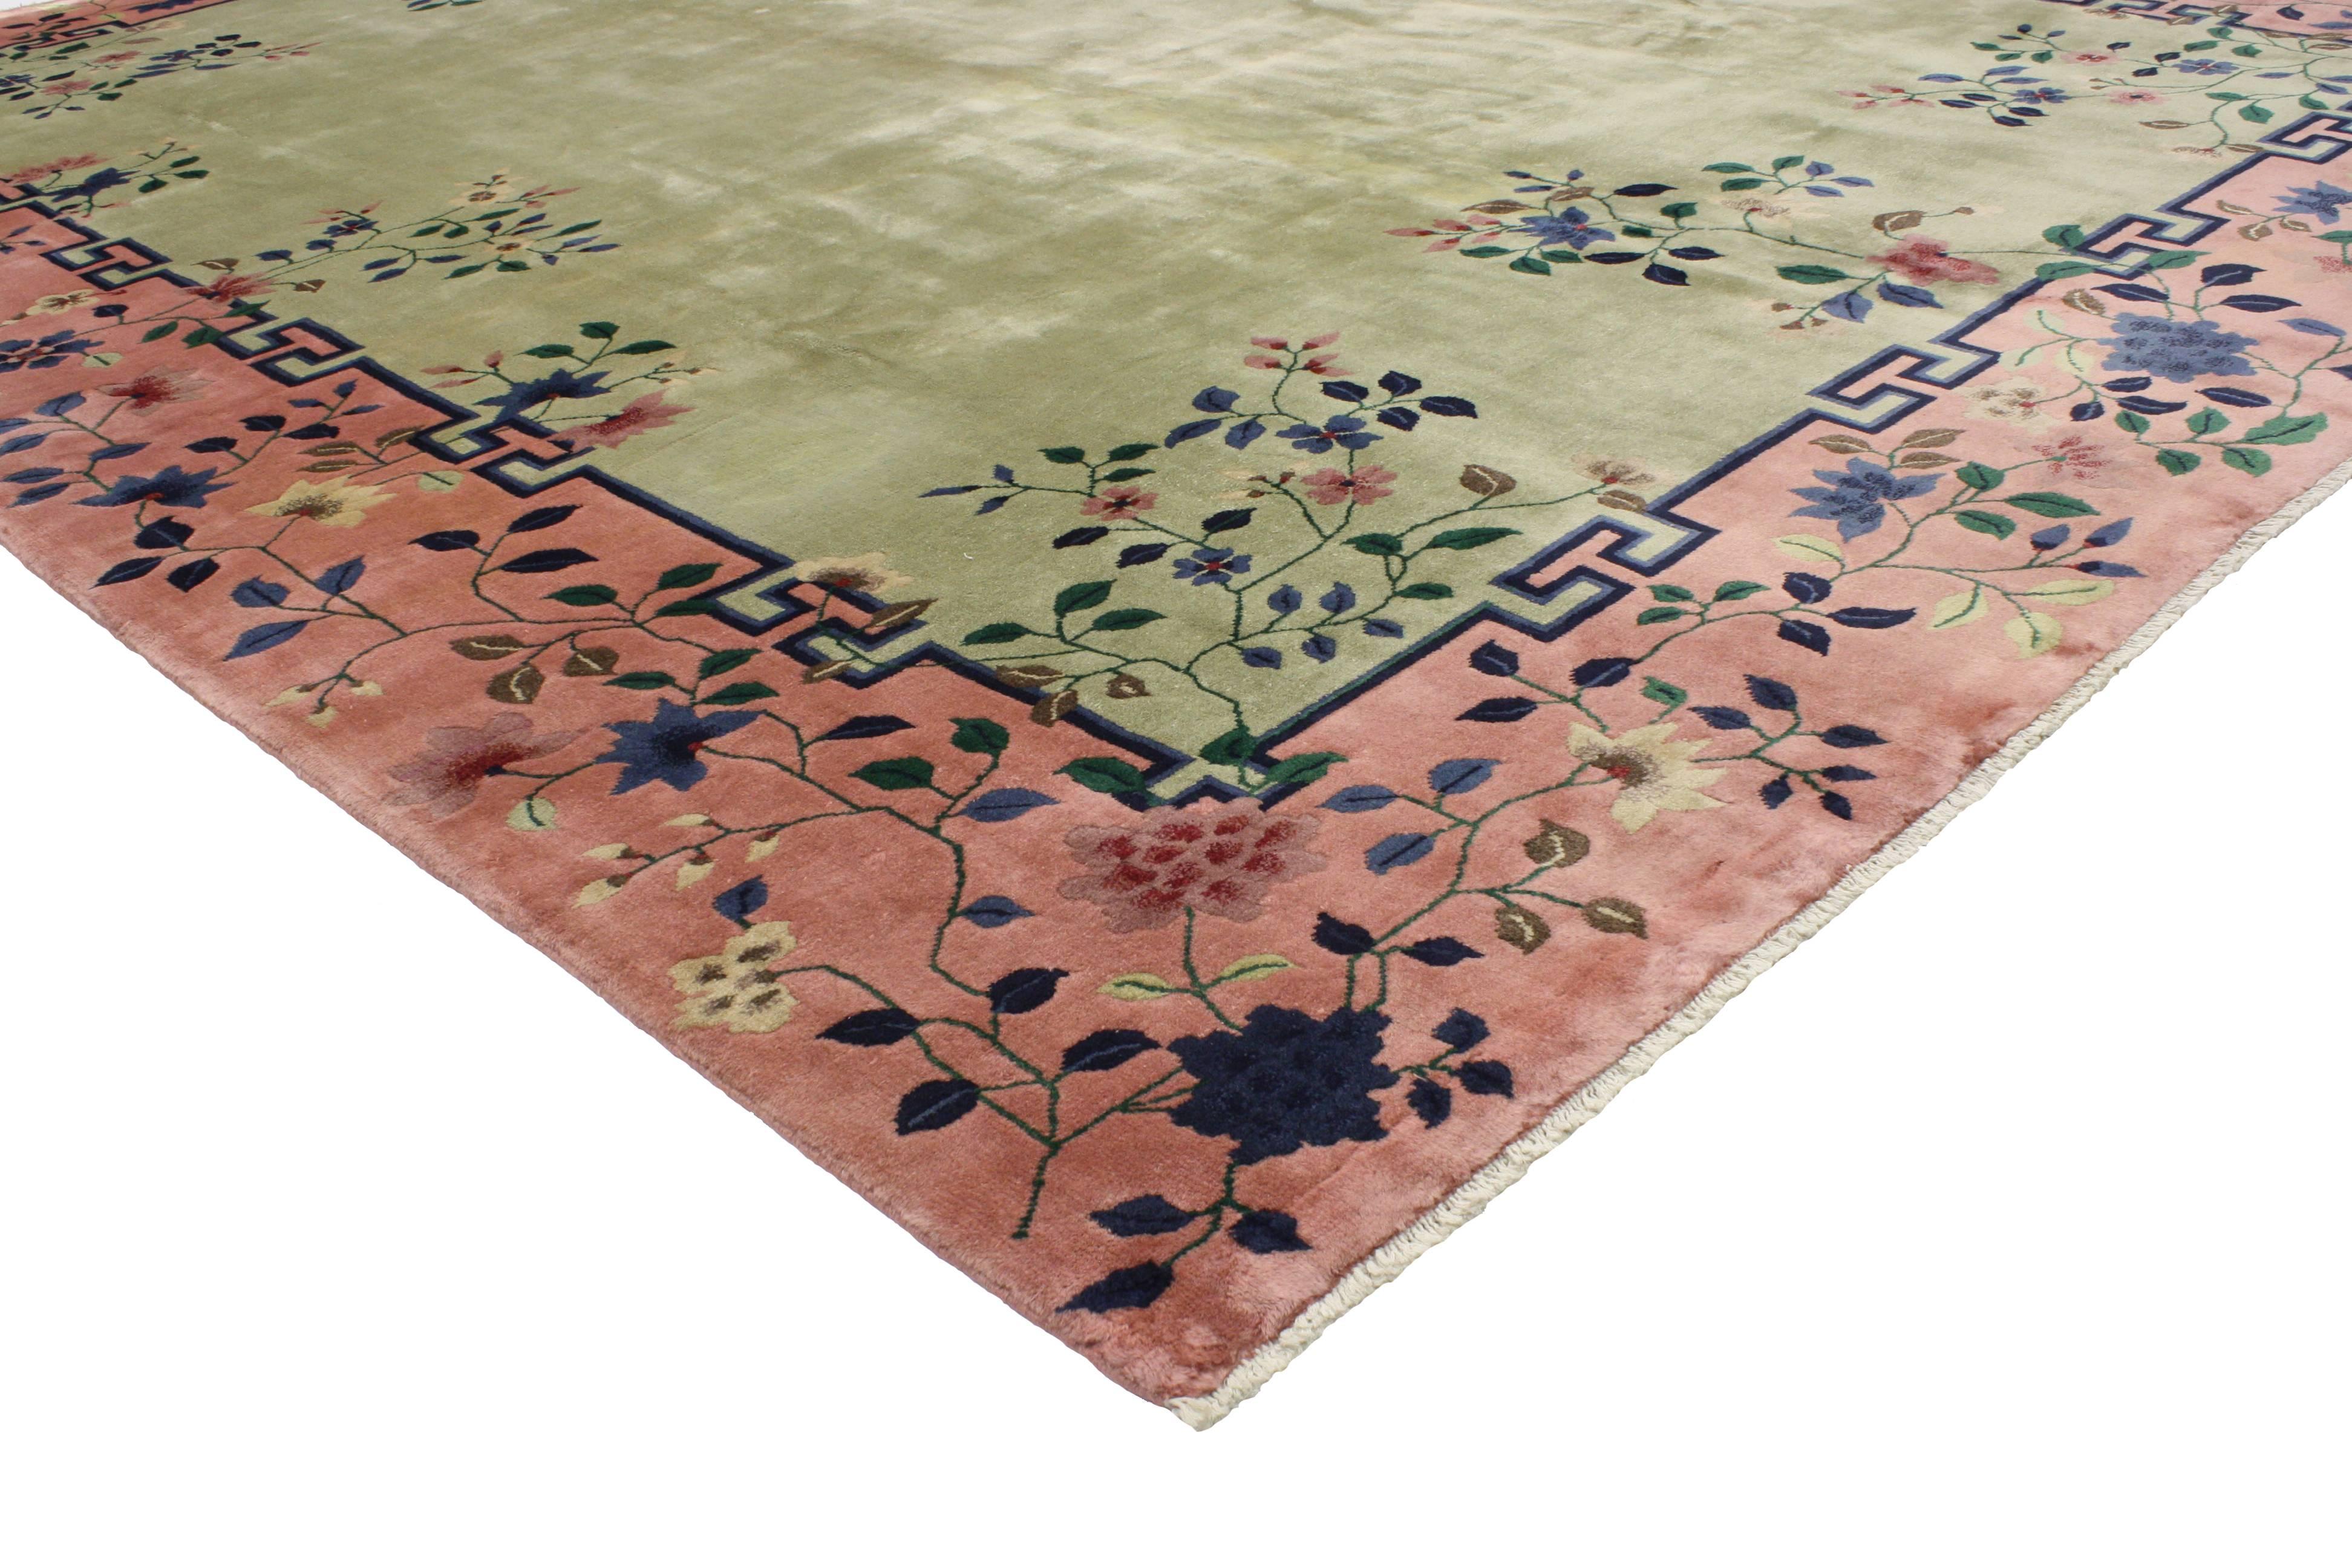 Revitalize your space with this 1920s Chinese Art Deco rug, attributed to Walter Nichols. A striking mix of an ornate floral pattern and high contrast colors, this Art Deco rug is bold and beautiful. Featuring Classic Chinese style and whimsical